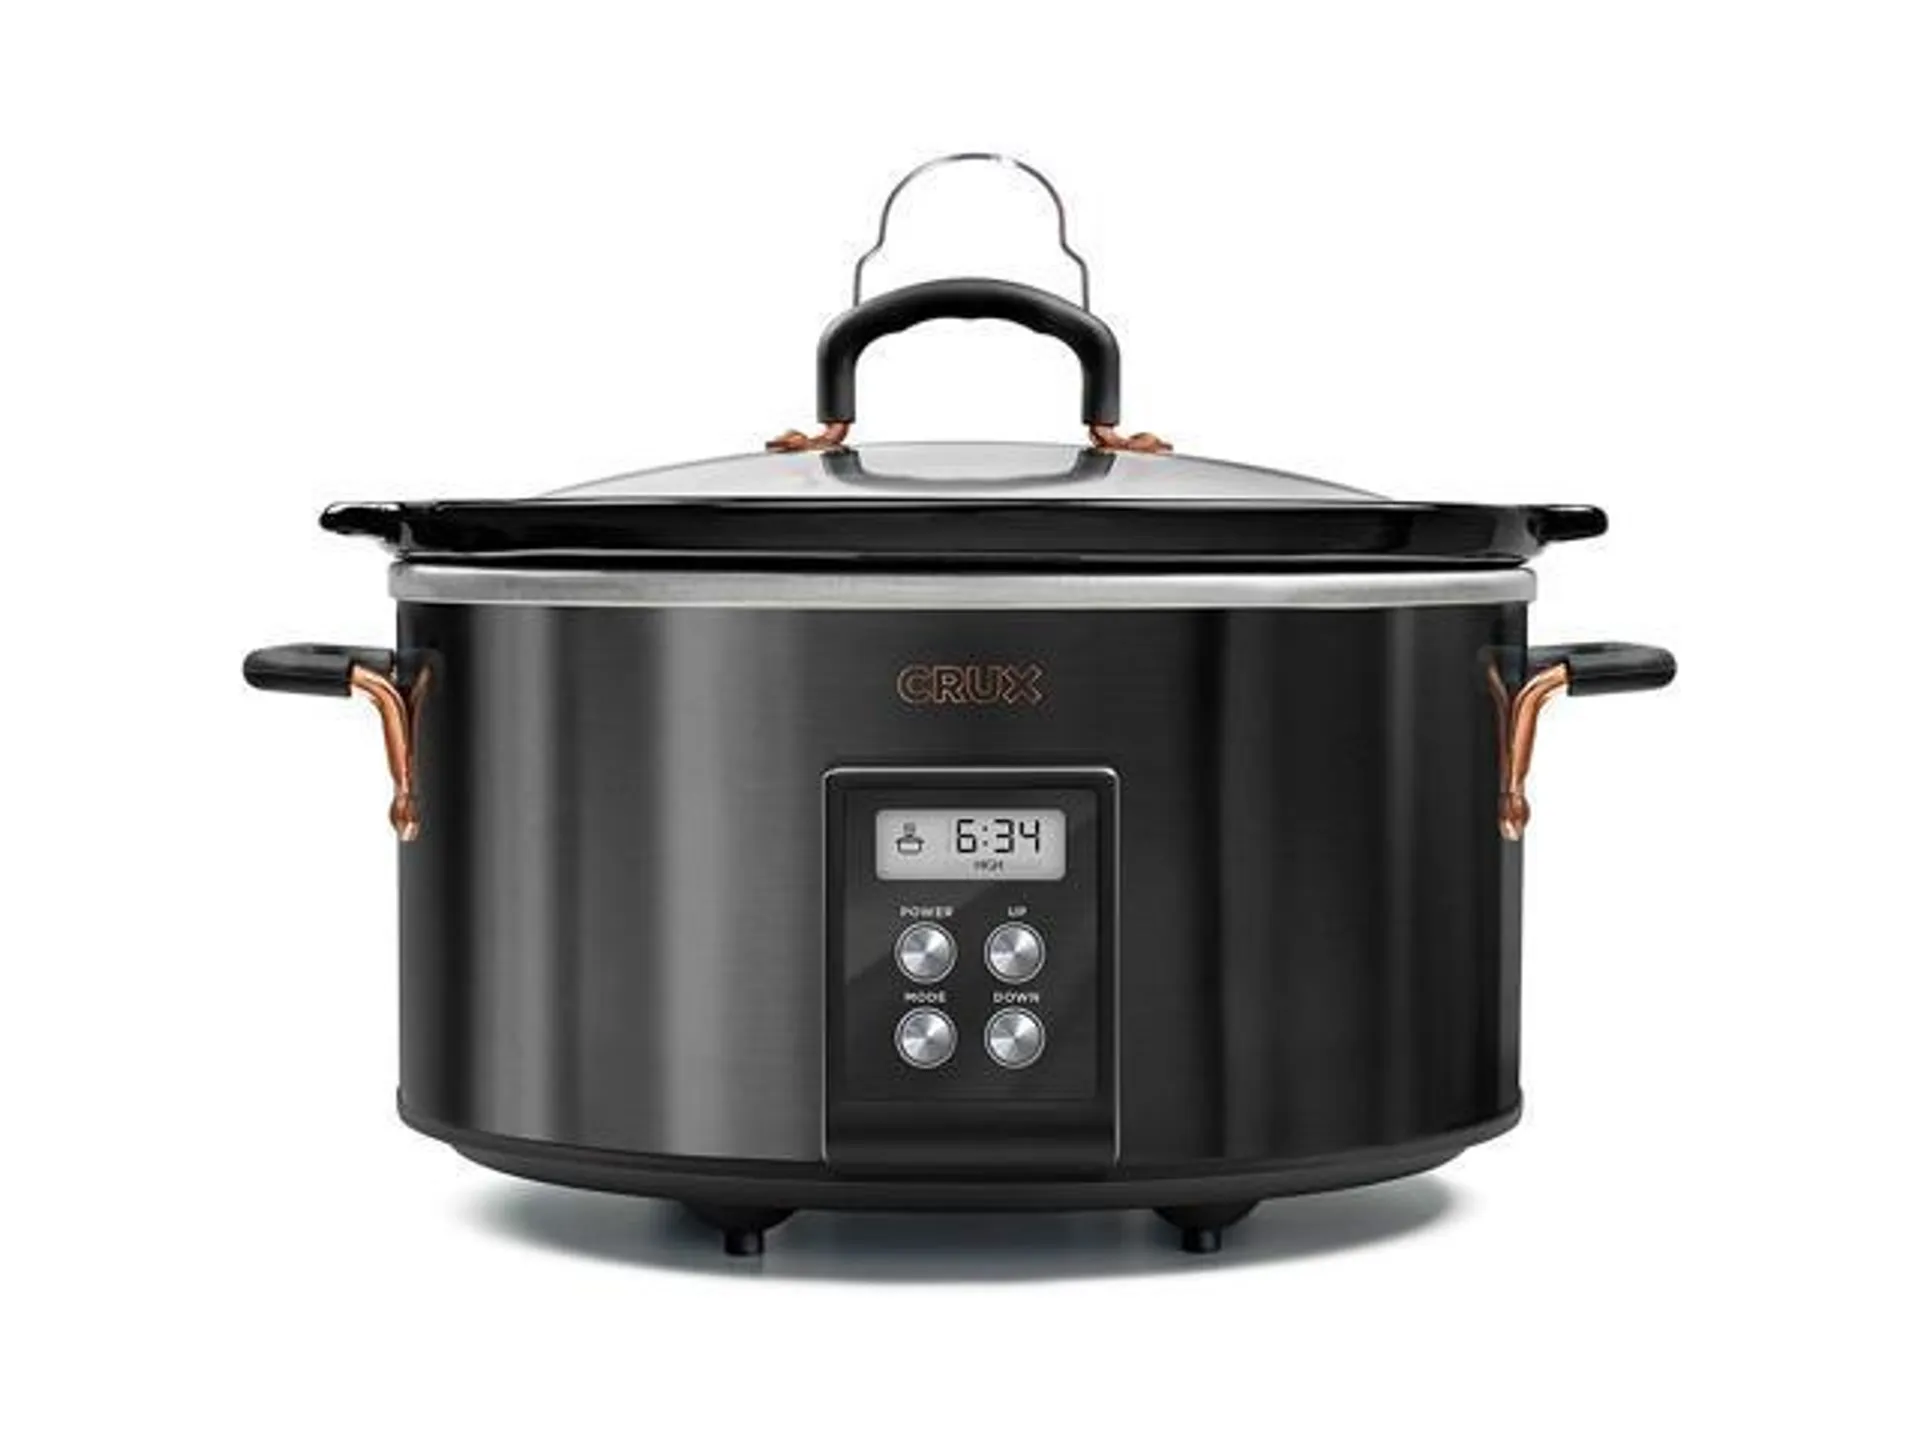 Crux 14681-SN 6 Quart Programmable Slow Cooker with Timer, Black Stainless Steel